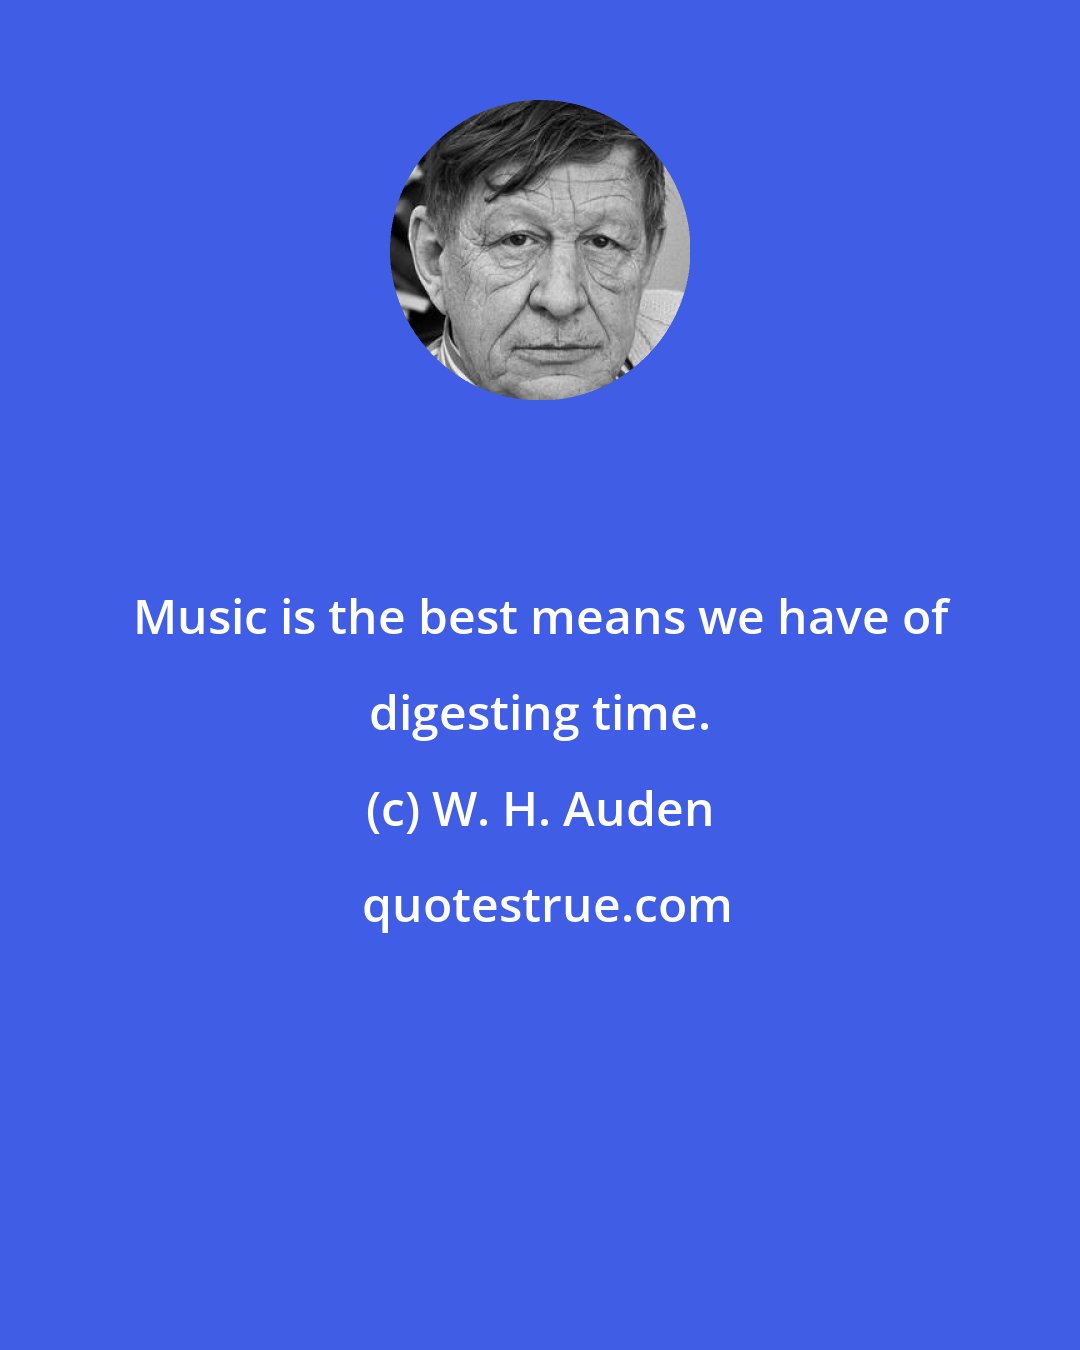 W. H. Auden: Music is the best means we have of digesting time.